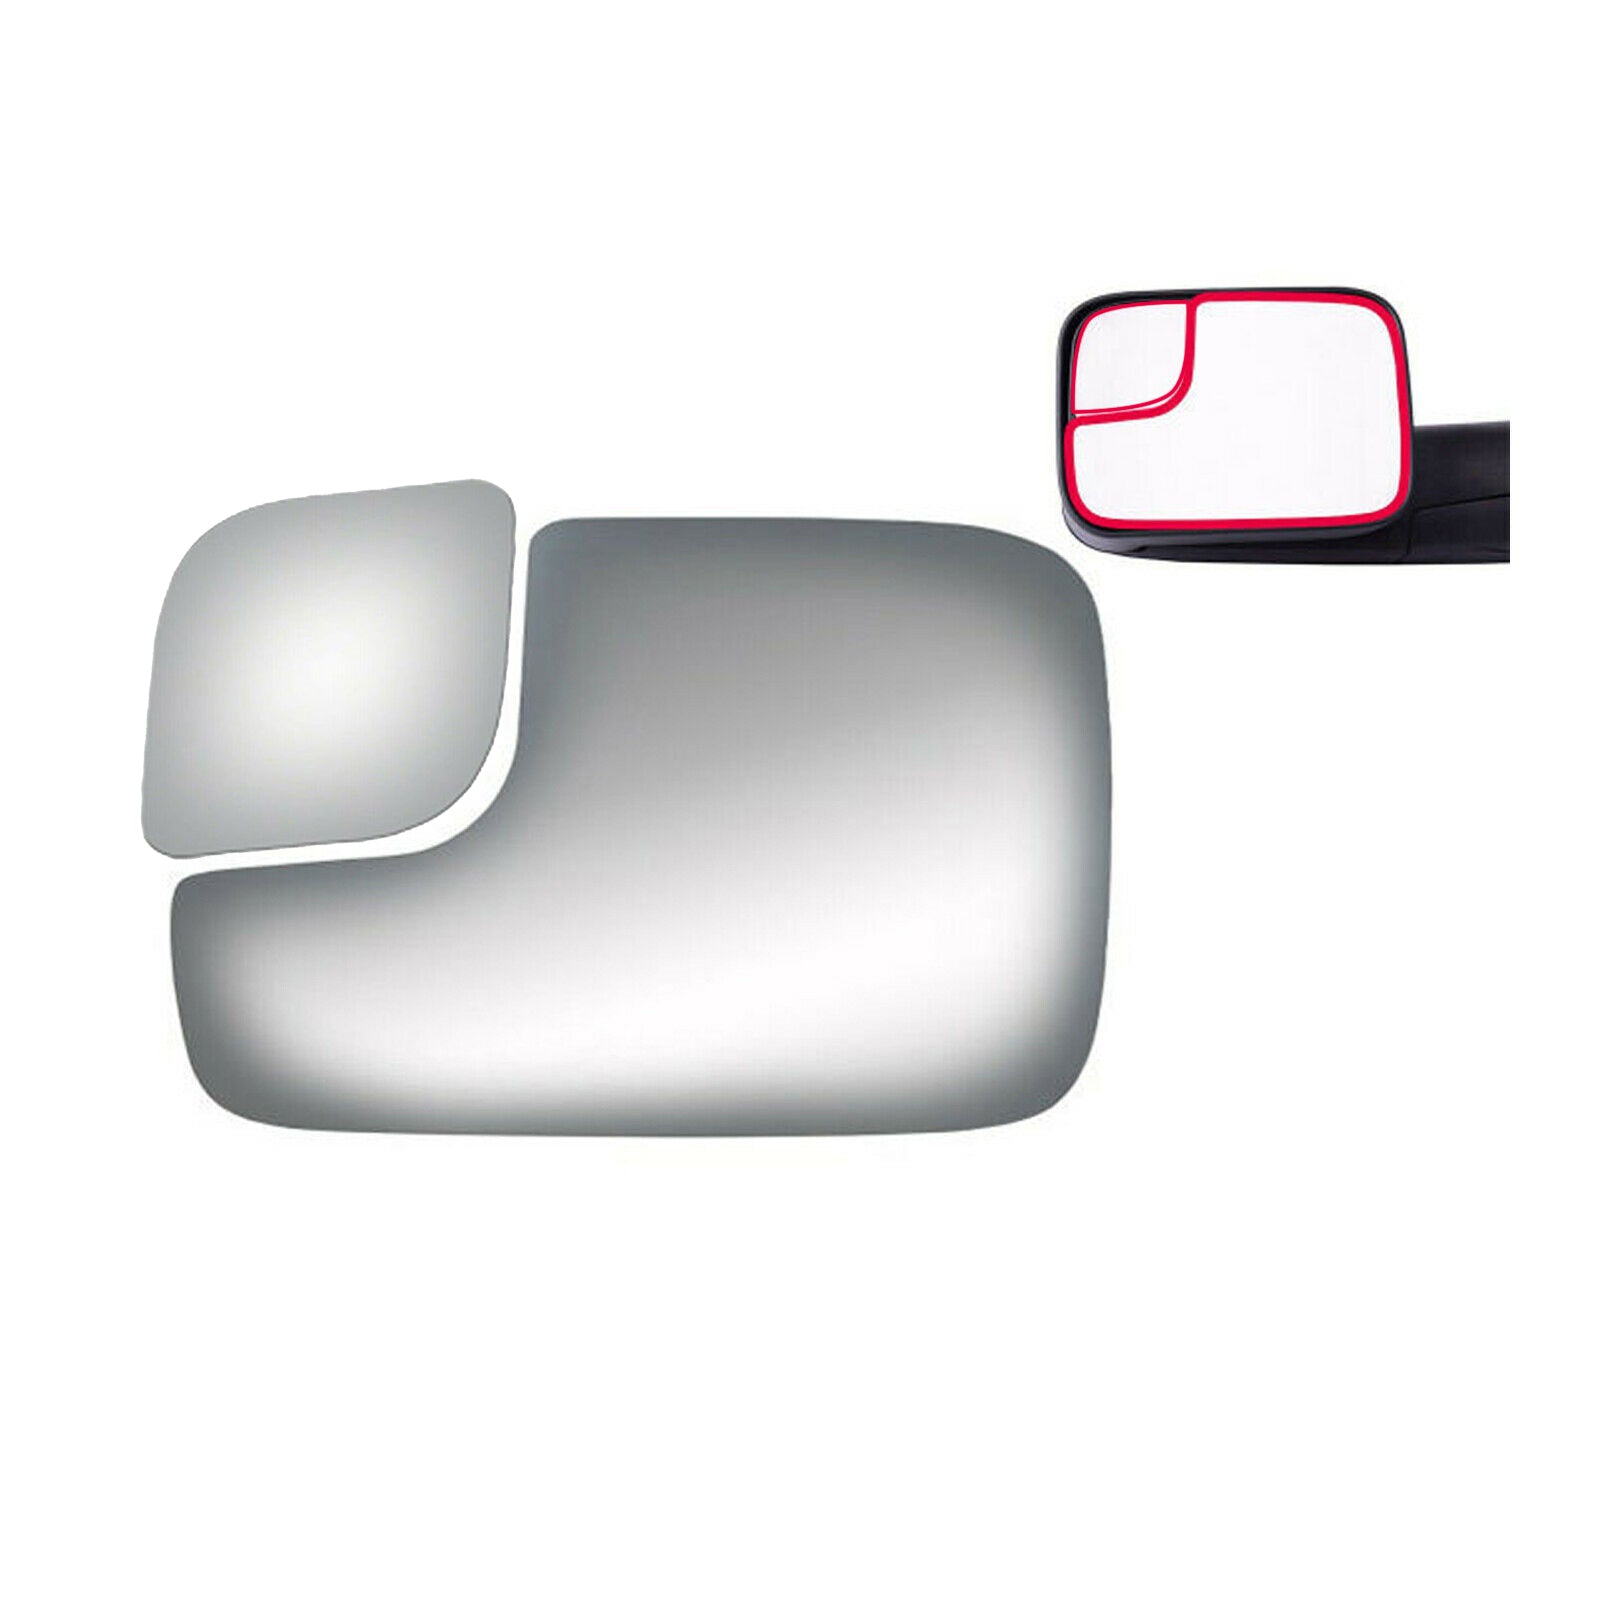 WLLW a pair of Towing Mirror Glass Replace for 1994-2009 Dodge Ram 1500 2500 3500, Driver Left Side LH/Passenger Right Side RH/The Both Sides Upper&Lower Flat Convex D-0014